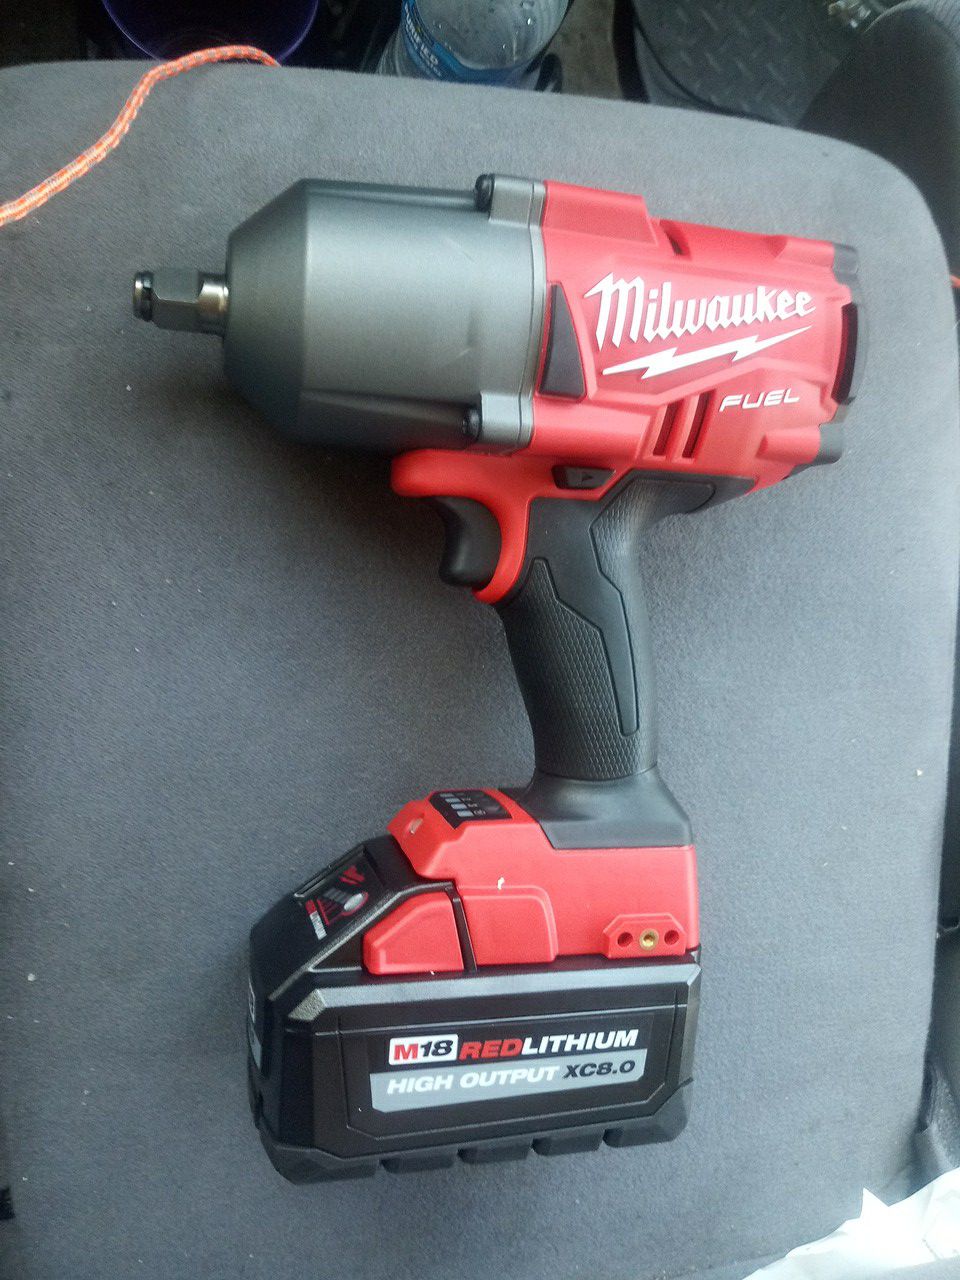 Brand new! Milwaukee M18 1/2" Fuel Impact with 8 amp battery